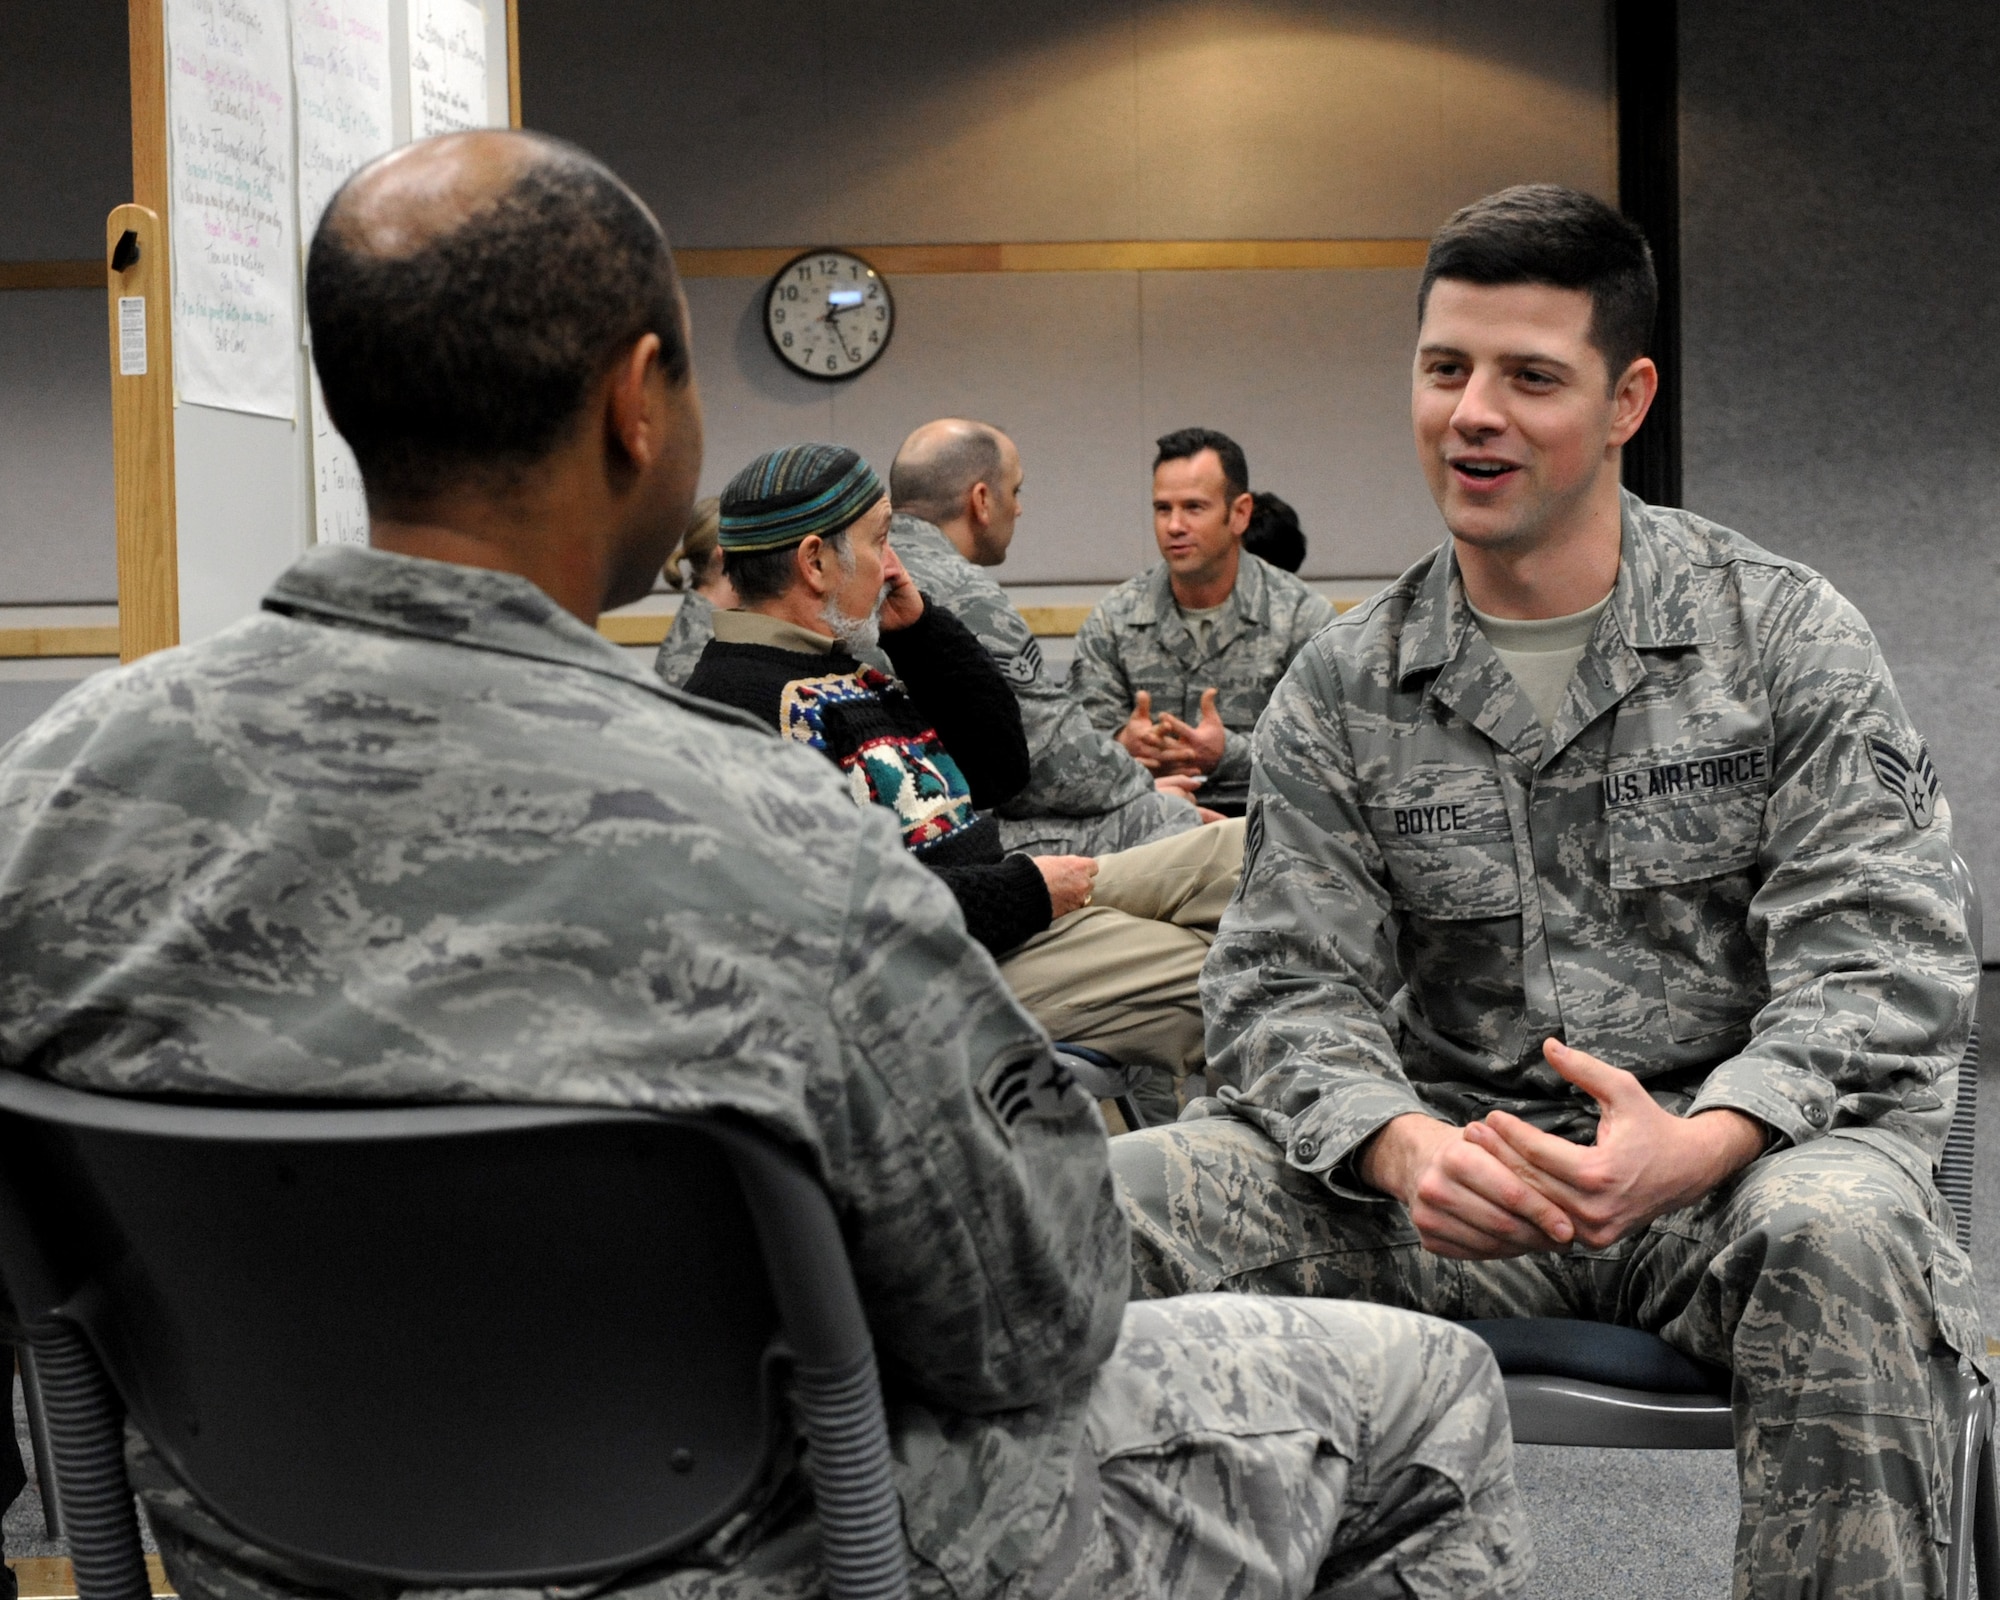 Oregon Air National Guard Senior Airman Brandon Boyce, right, and Senior Airman Brandon Bingham, left, interact during a meeting of the 142nd Fighter Wing’s Diversity and Inclusion Counsel, Feb. 8, 2015, Portland Air National Guard Base, Ore. The Diversity and Inclusion Counsel meets during Unit Training Assembly weekends to help develop the total force crucial for mission success. (U.S. Air National Guard photo by Tech. Sgt. John Hughel, 142nd Fighter Wing Public Affairs/Released)